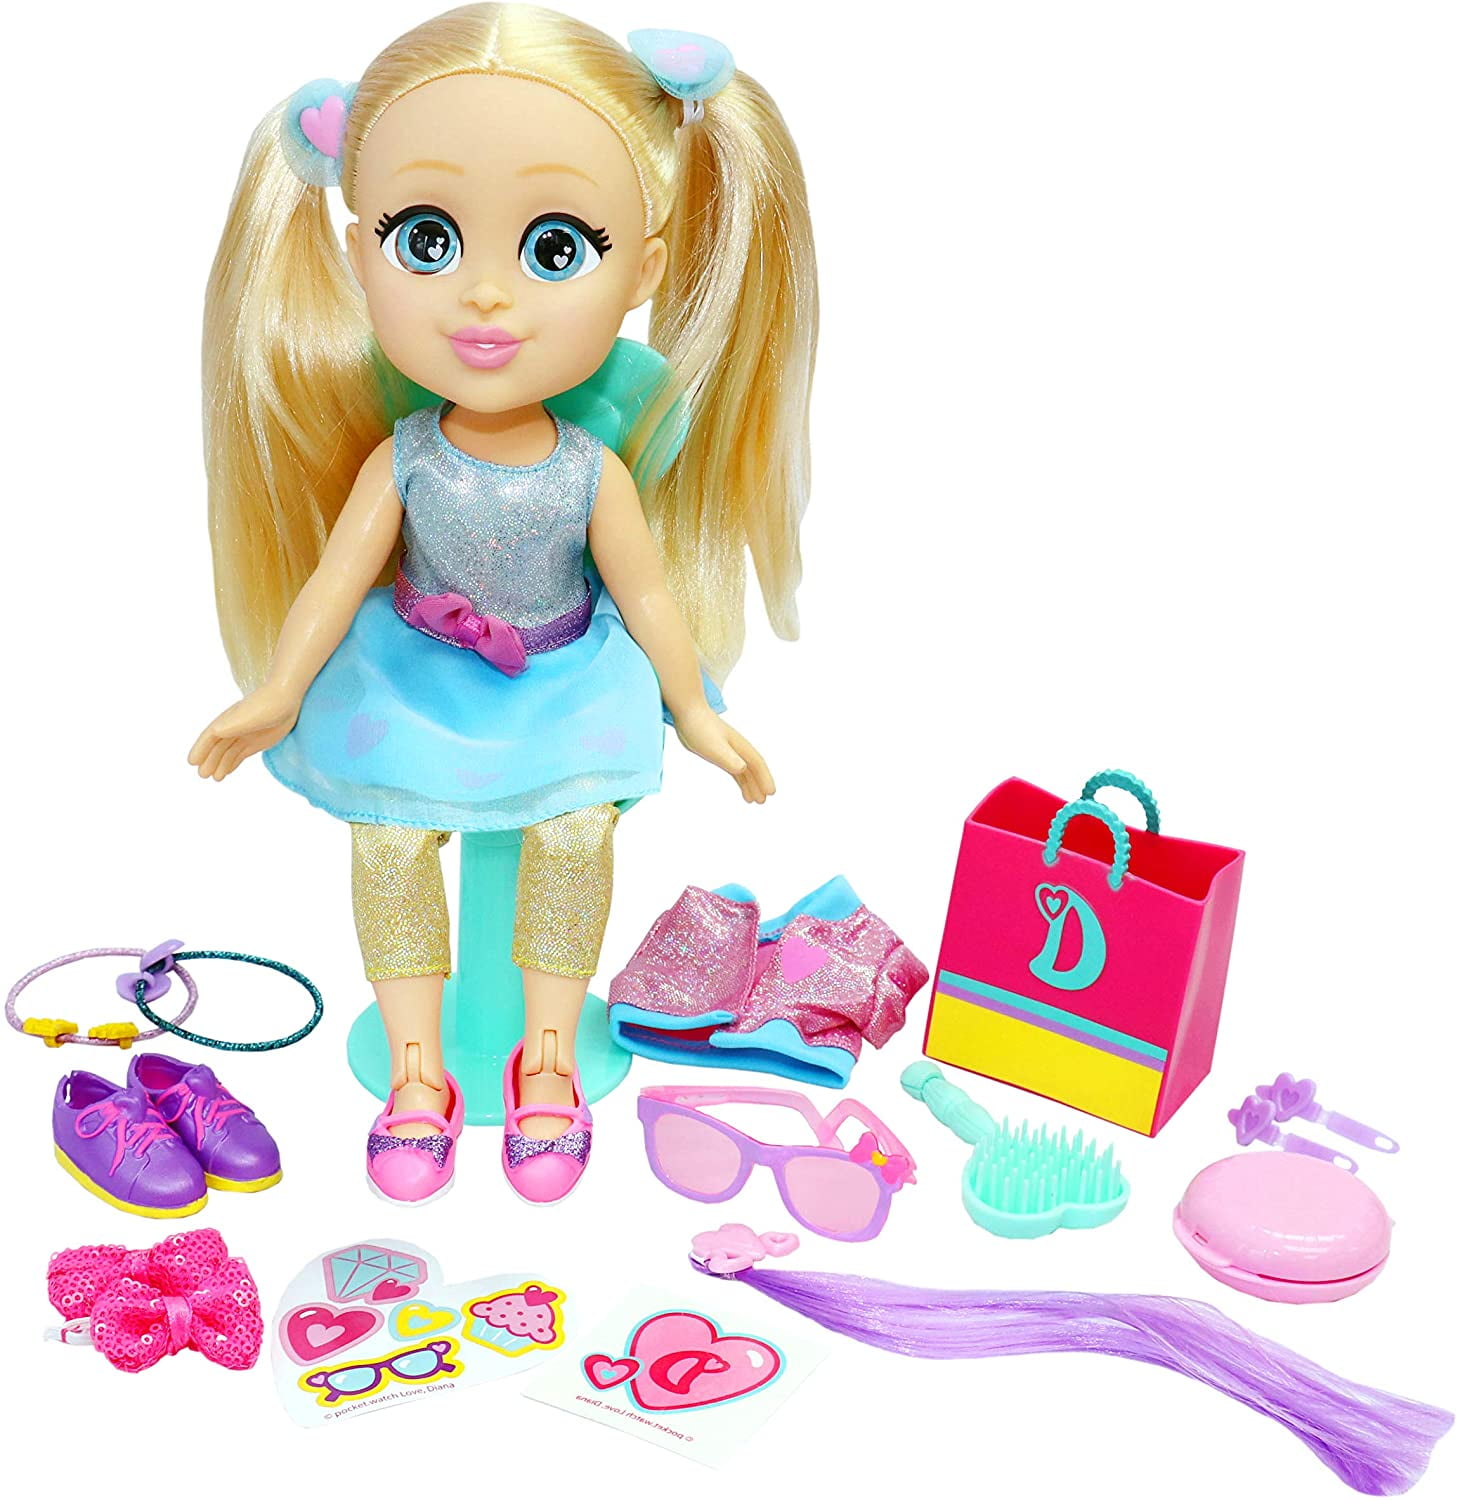 Love Diana Mystery Shopper Playset With 13 inch Doll Plus 12 Surprises In Hand 